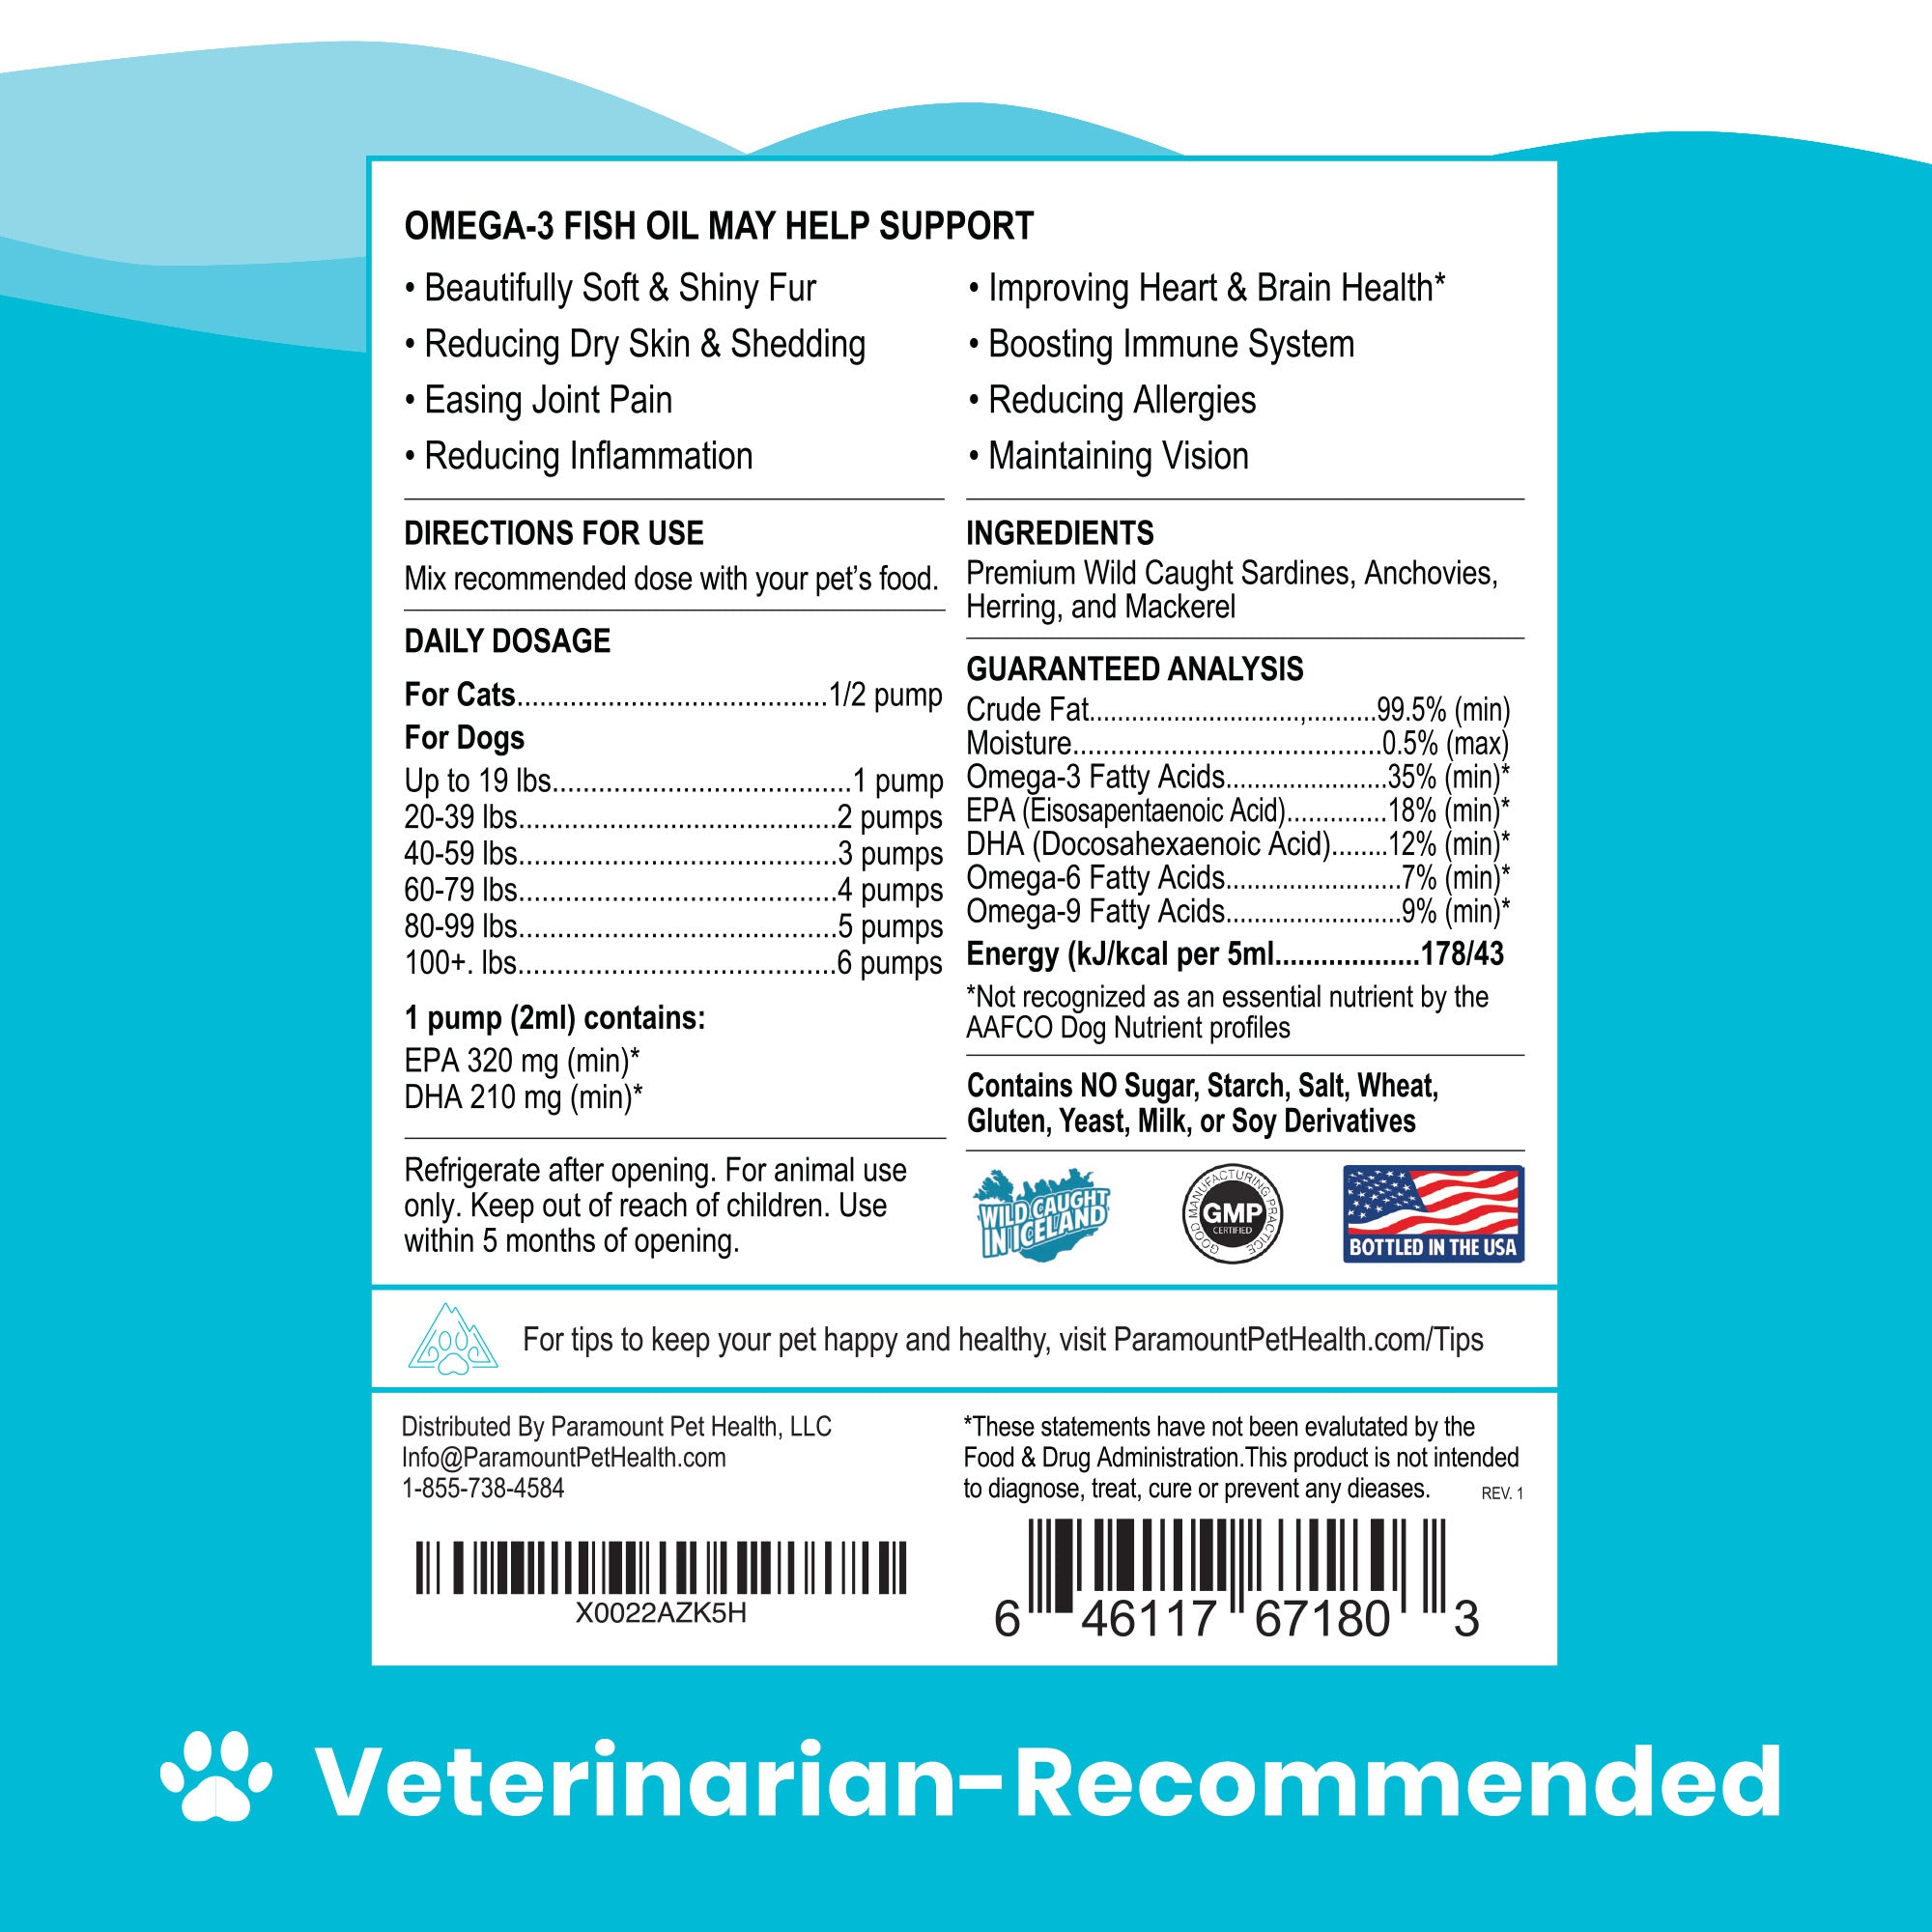 Omega-3 for Dogs and Cats Ingredients and Dosage